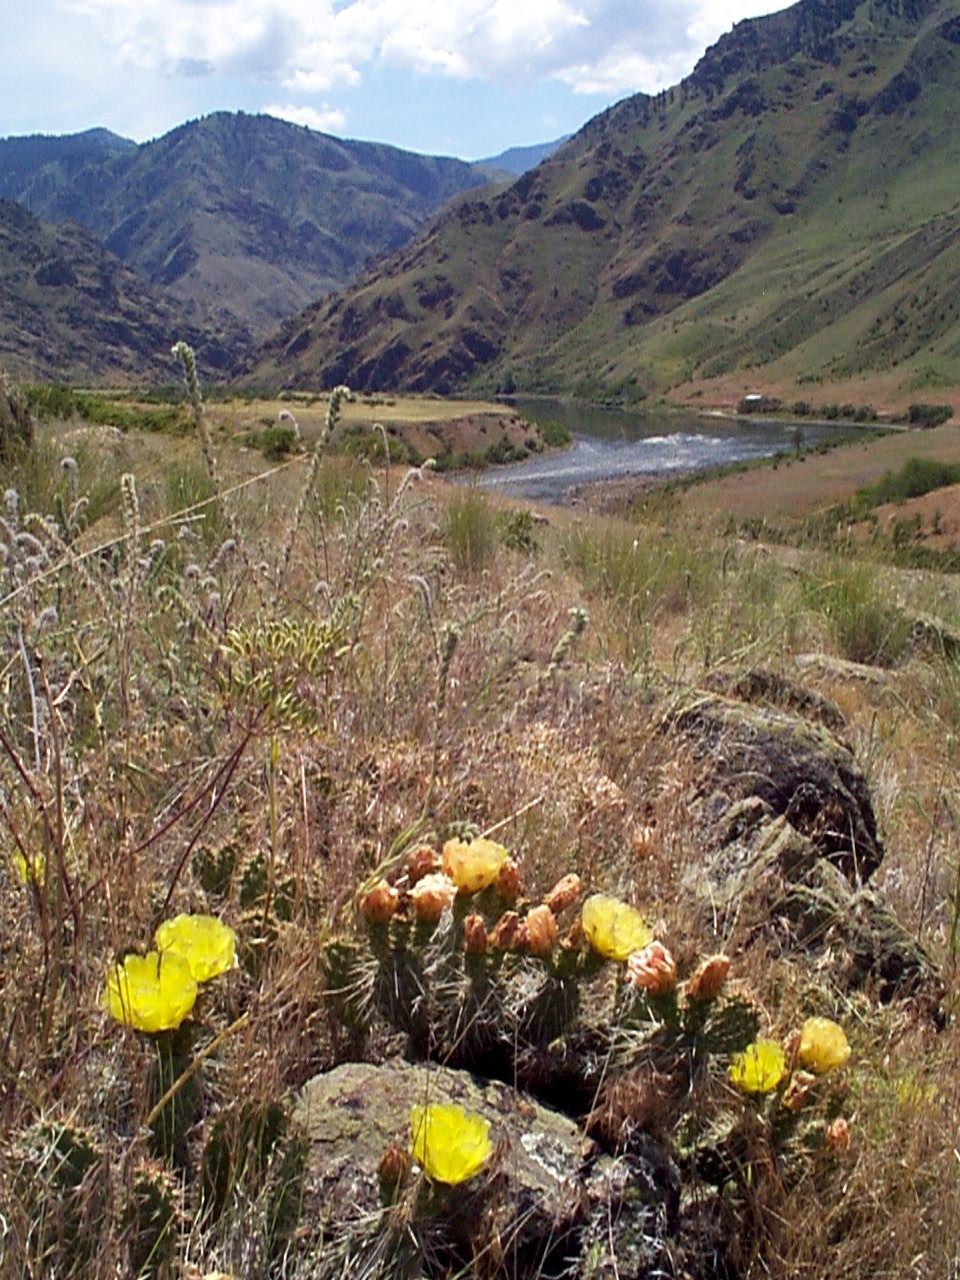 Rough river canyon with cactus flowers in foreground